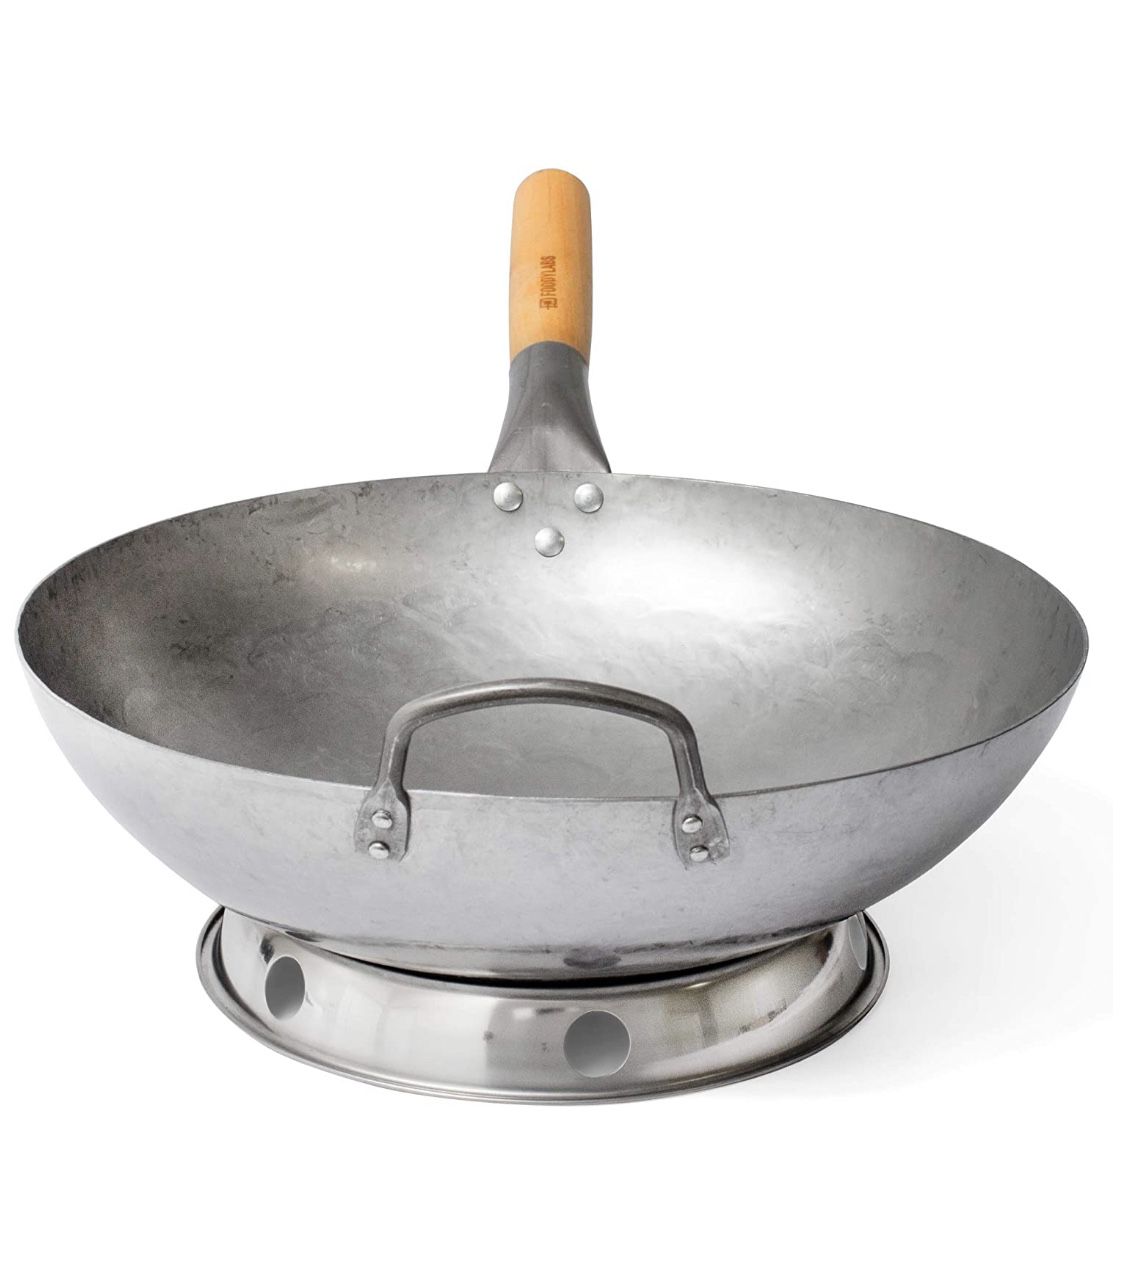 Wok Pan for home and professional cooking